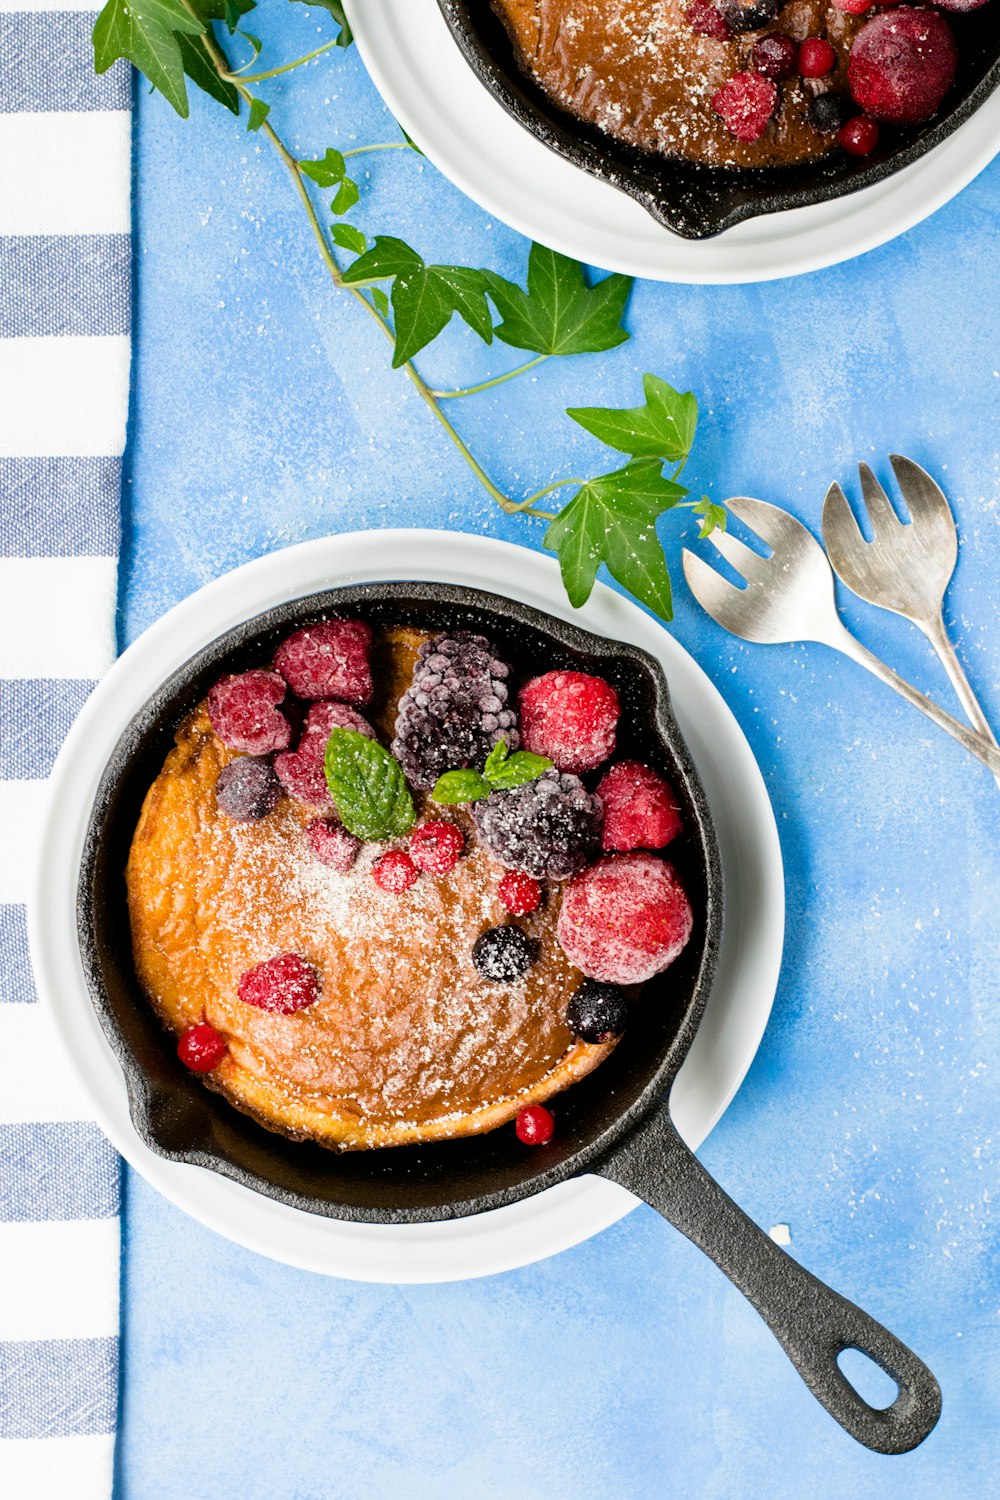 cooked pancake with raspberries and blueberries